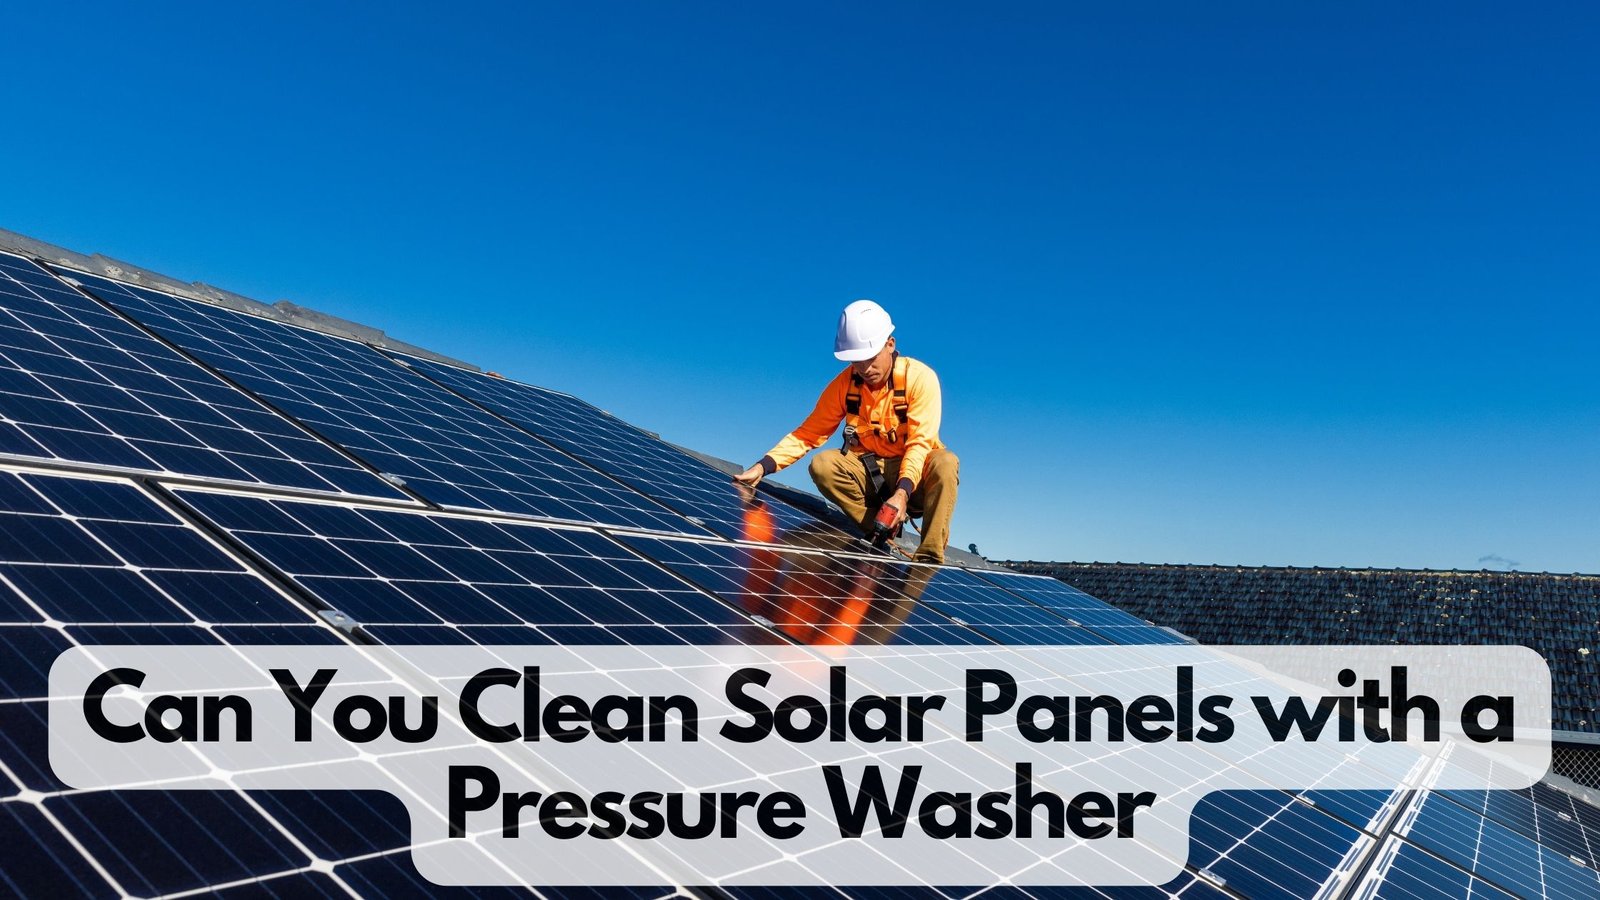 Can You Clean Solar Panels with a Pressure Washer